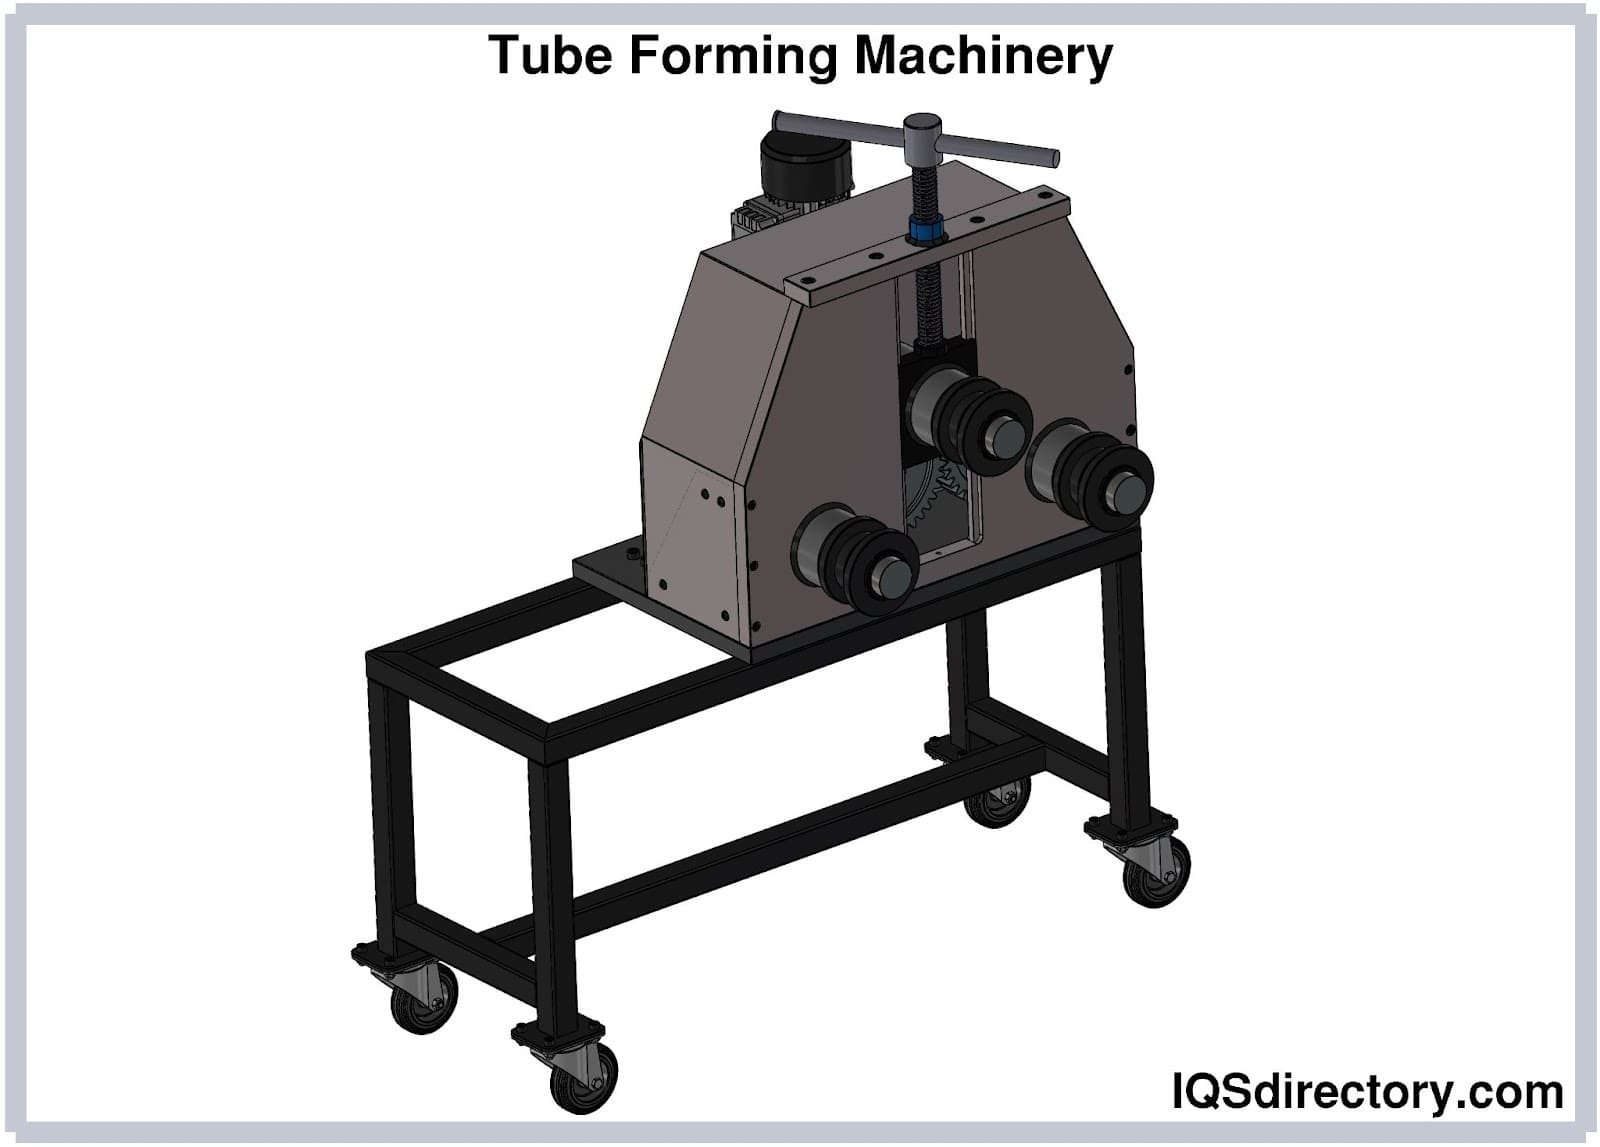 Tube Fabricating Machinery: What Is It? How Does It Work?